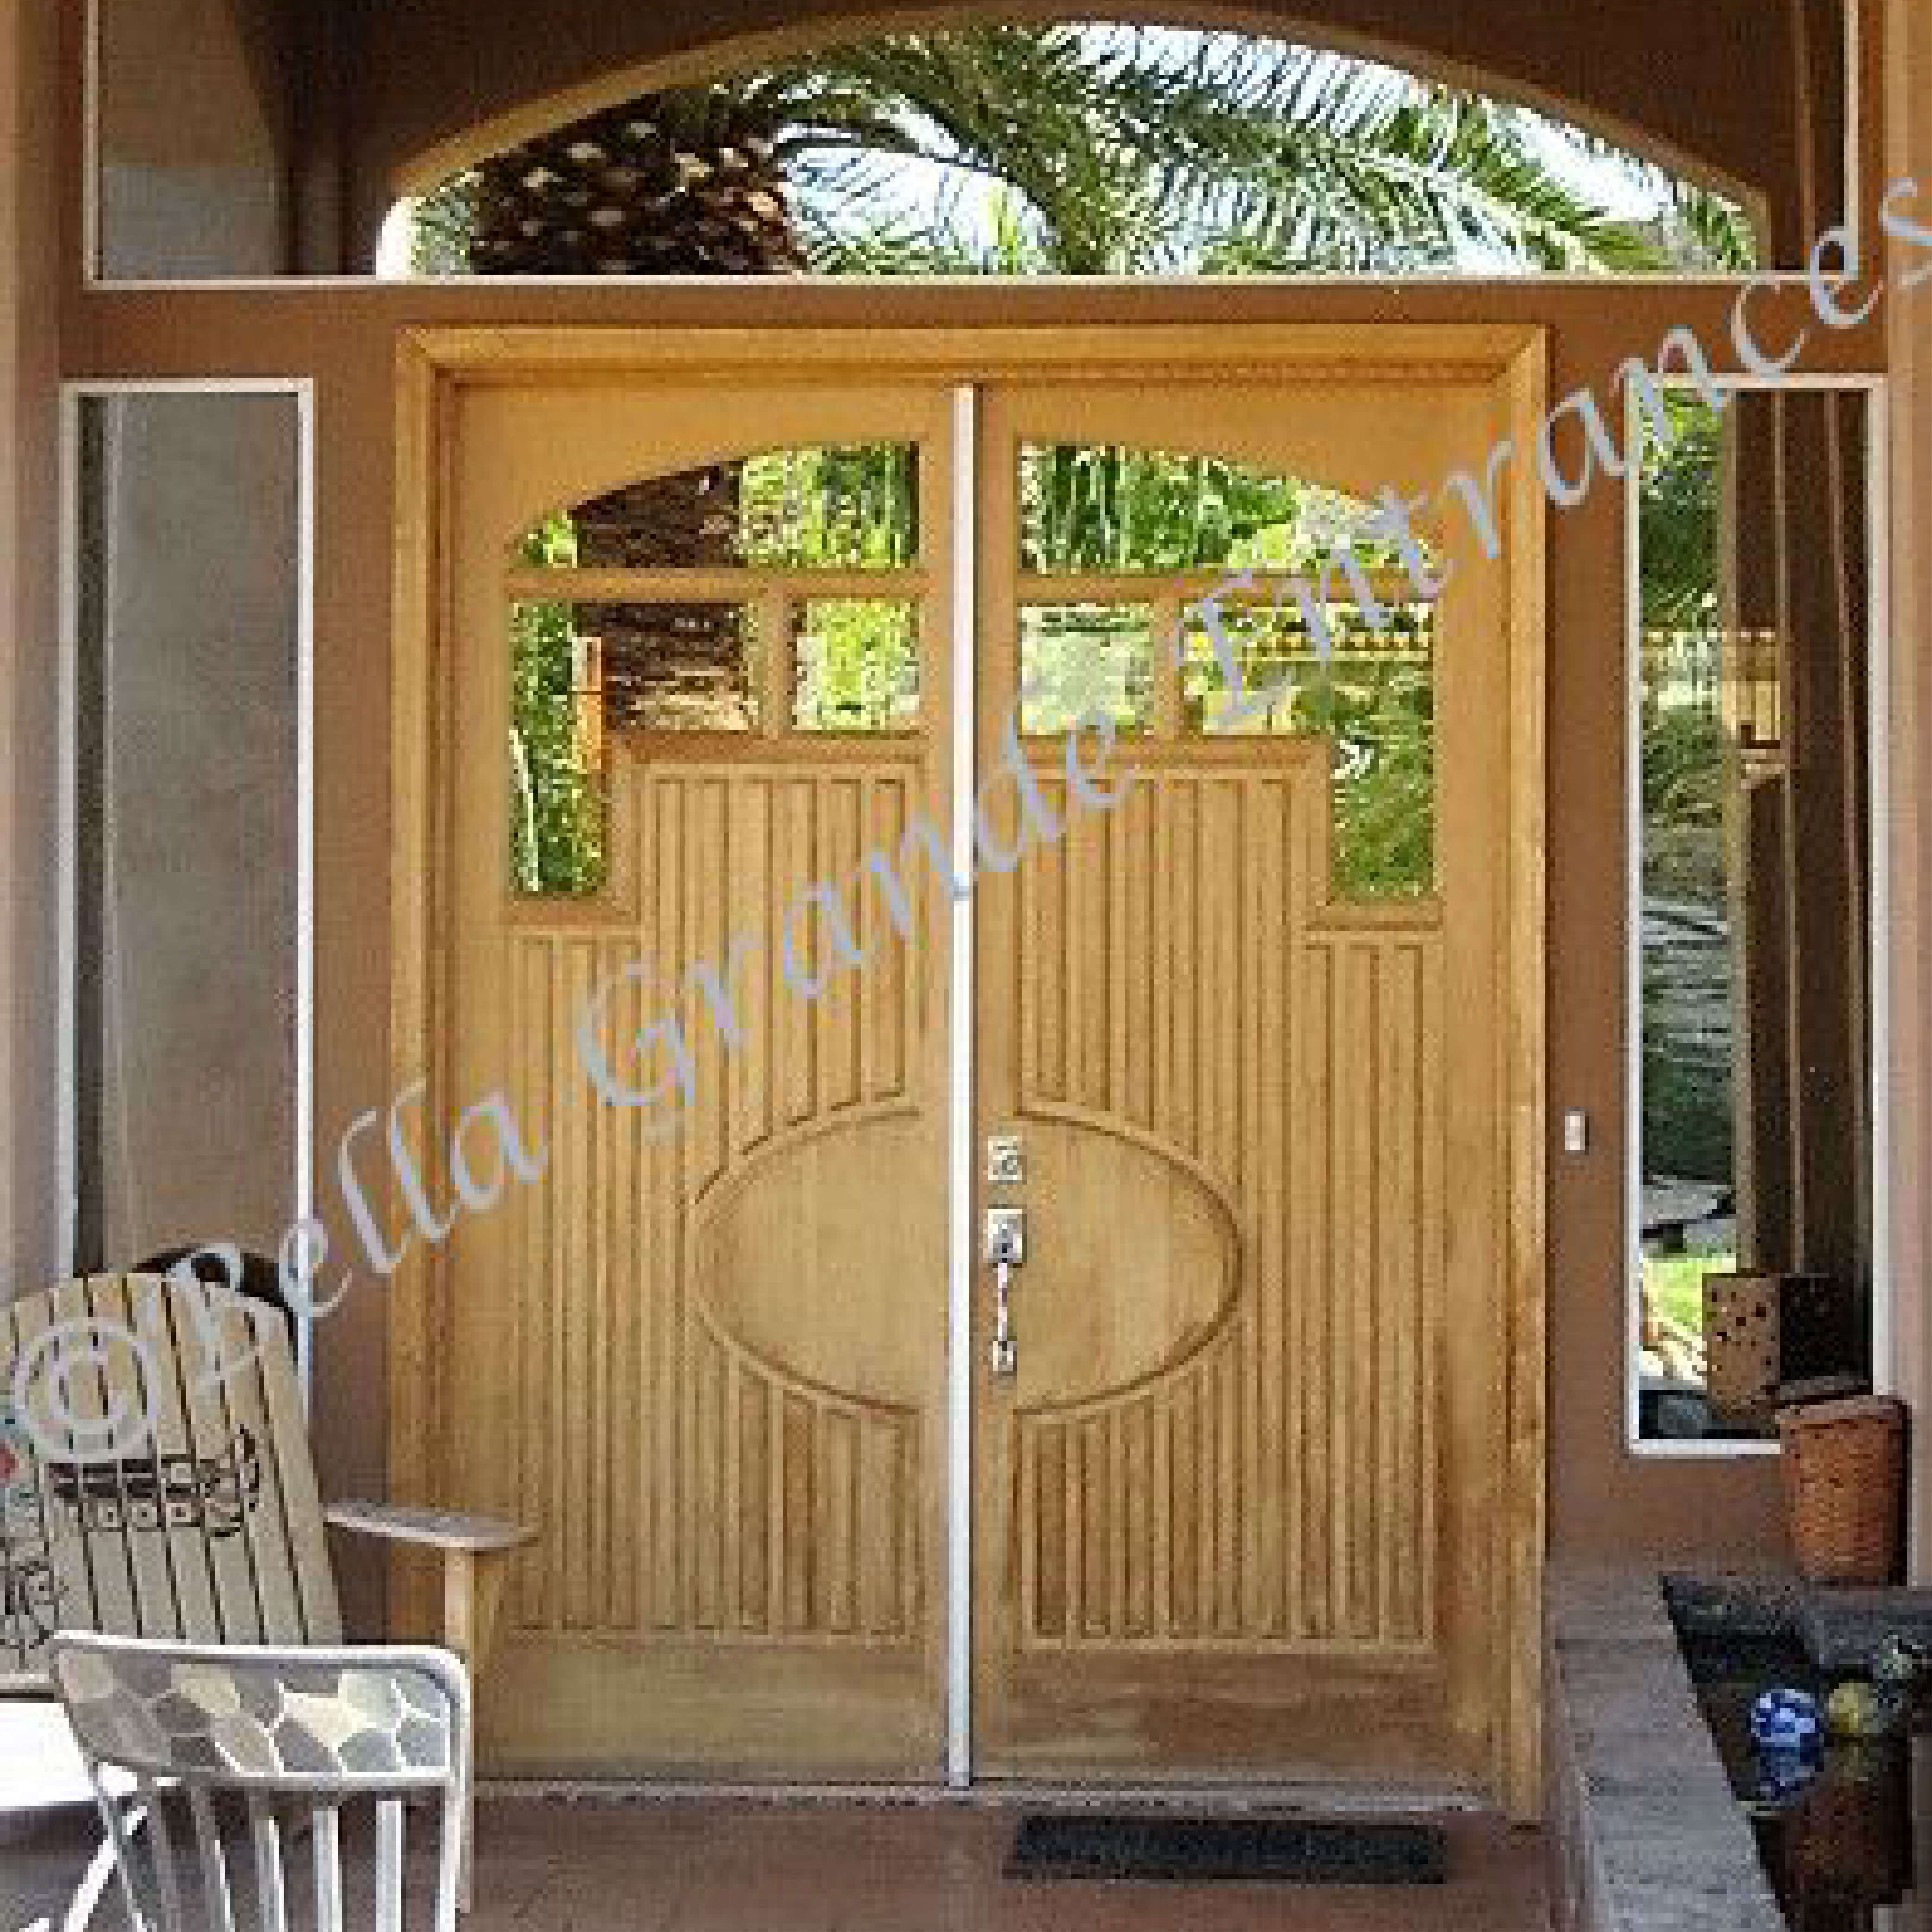 Before installing the Bella Grande Entrances Double Iron Model 2318 door, take a look at the image.